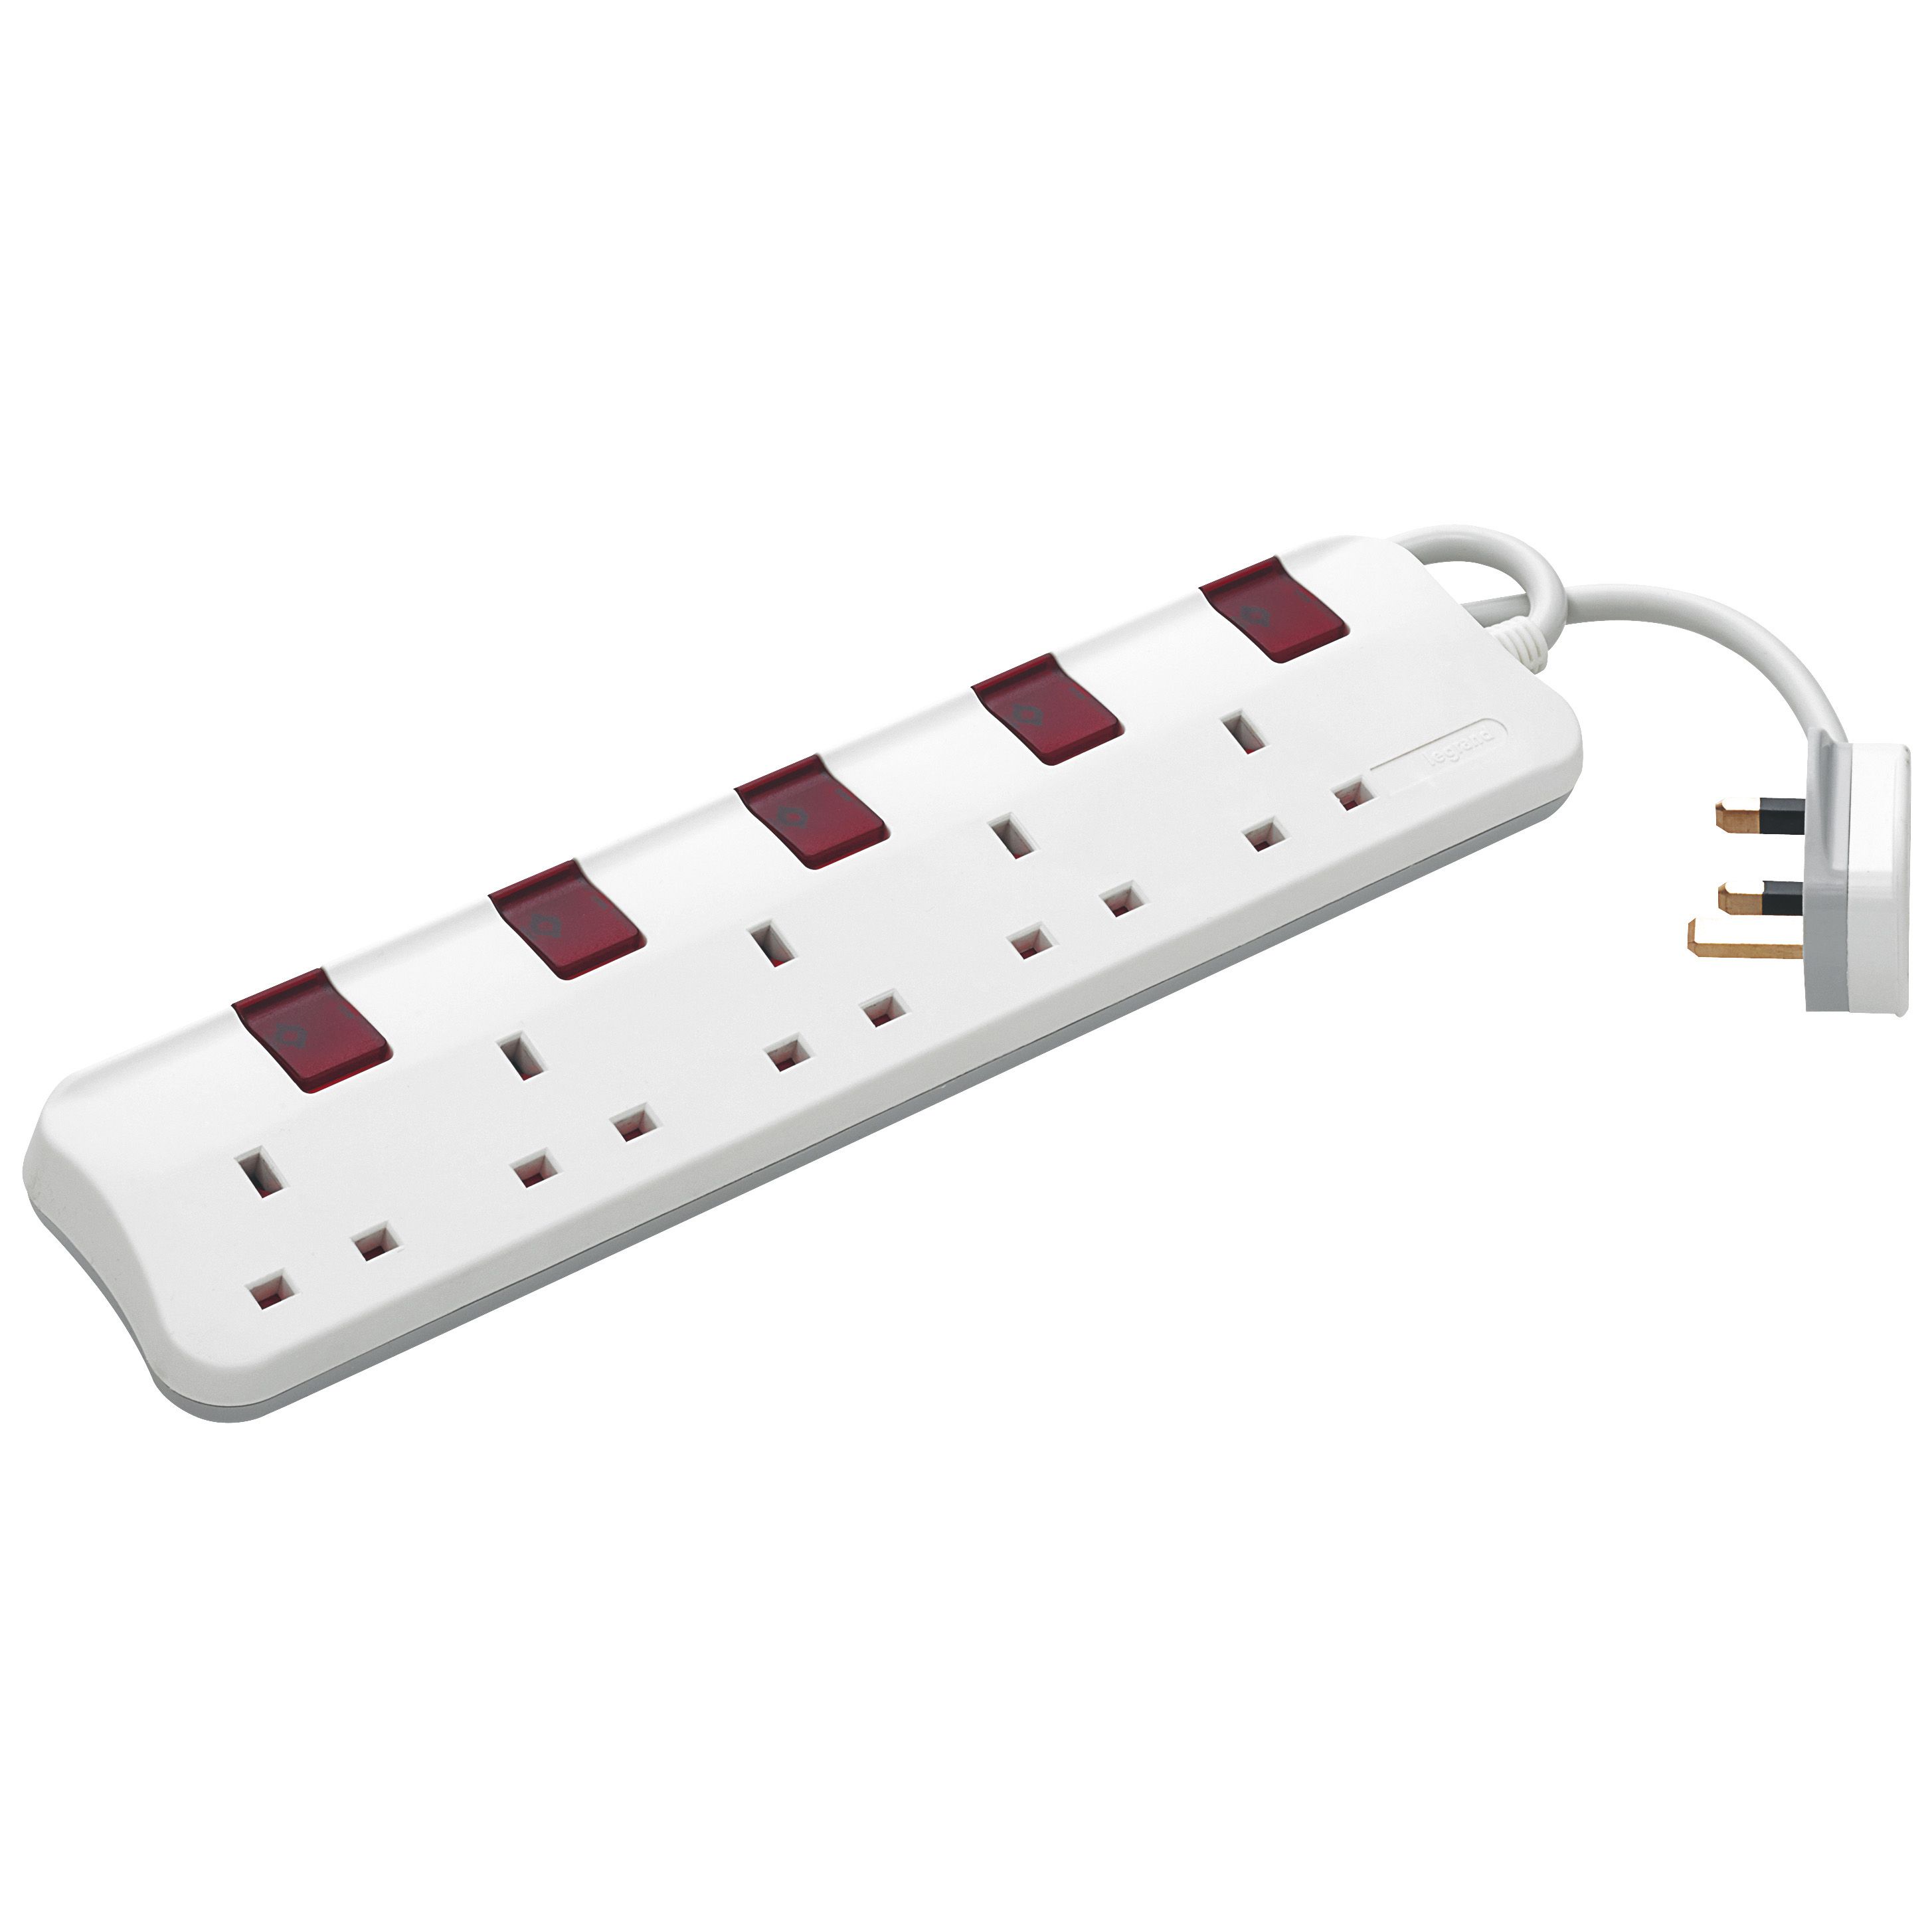 698405 - Legrand   - British std multi outlet extension 5x2P+E  one switch per socket 3 m cord